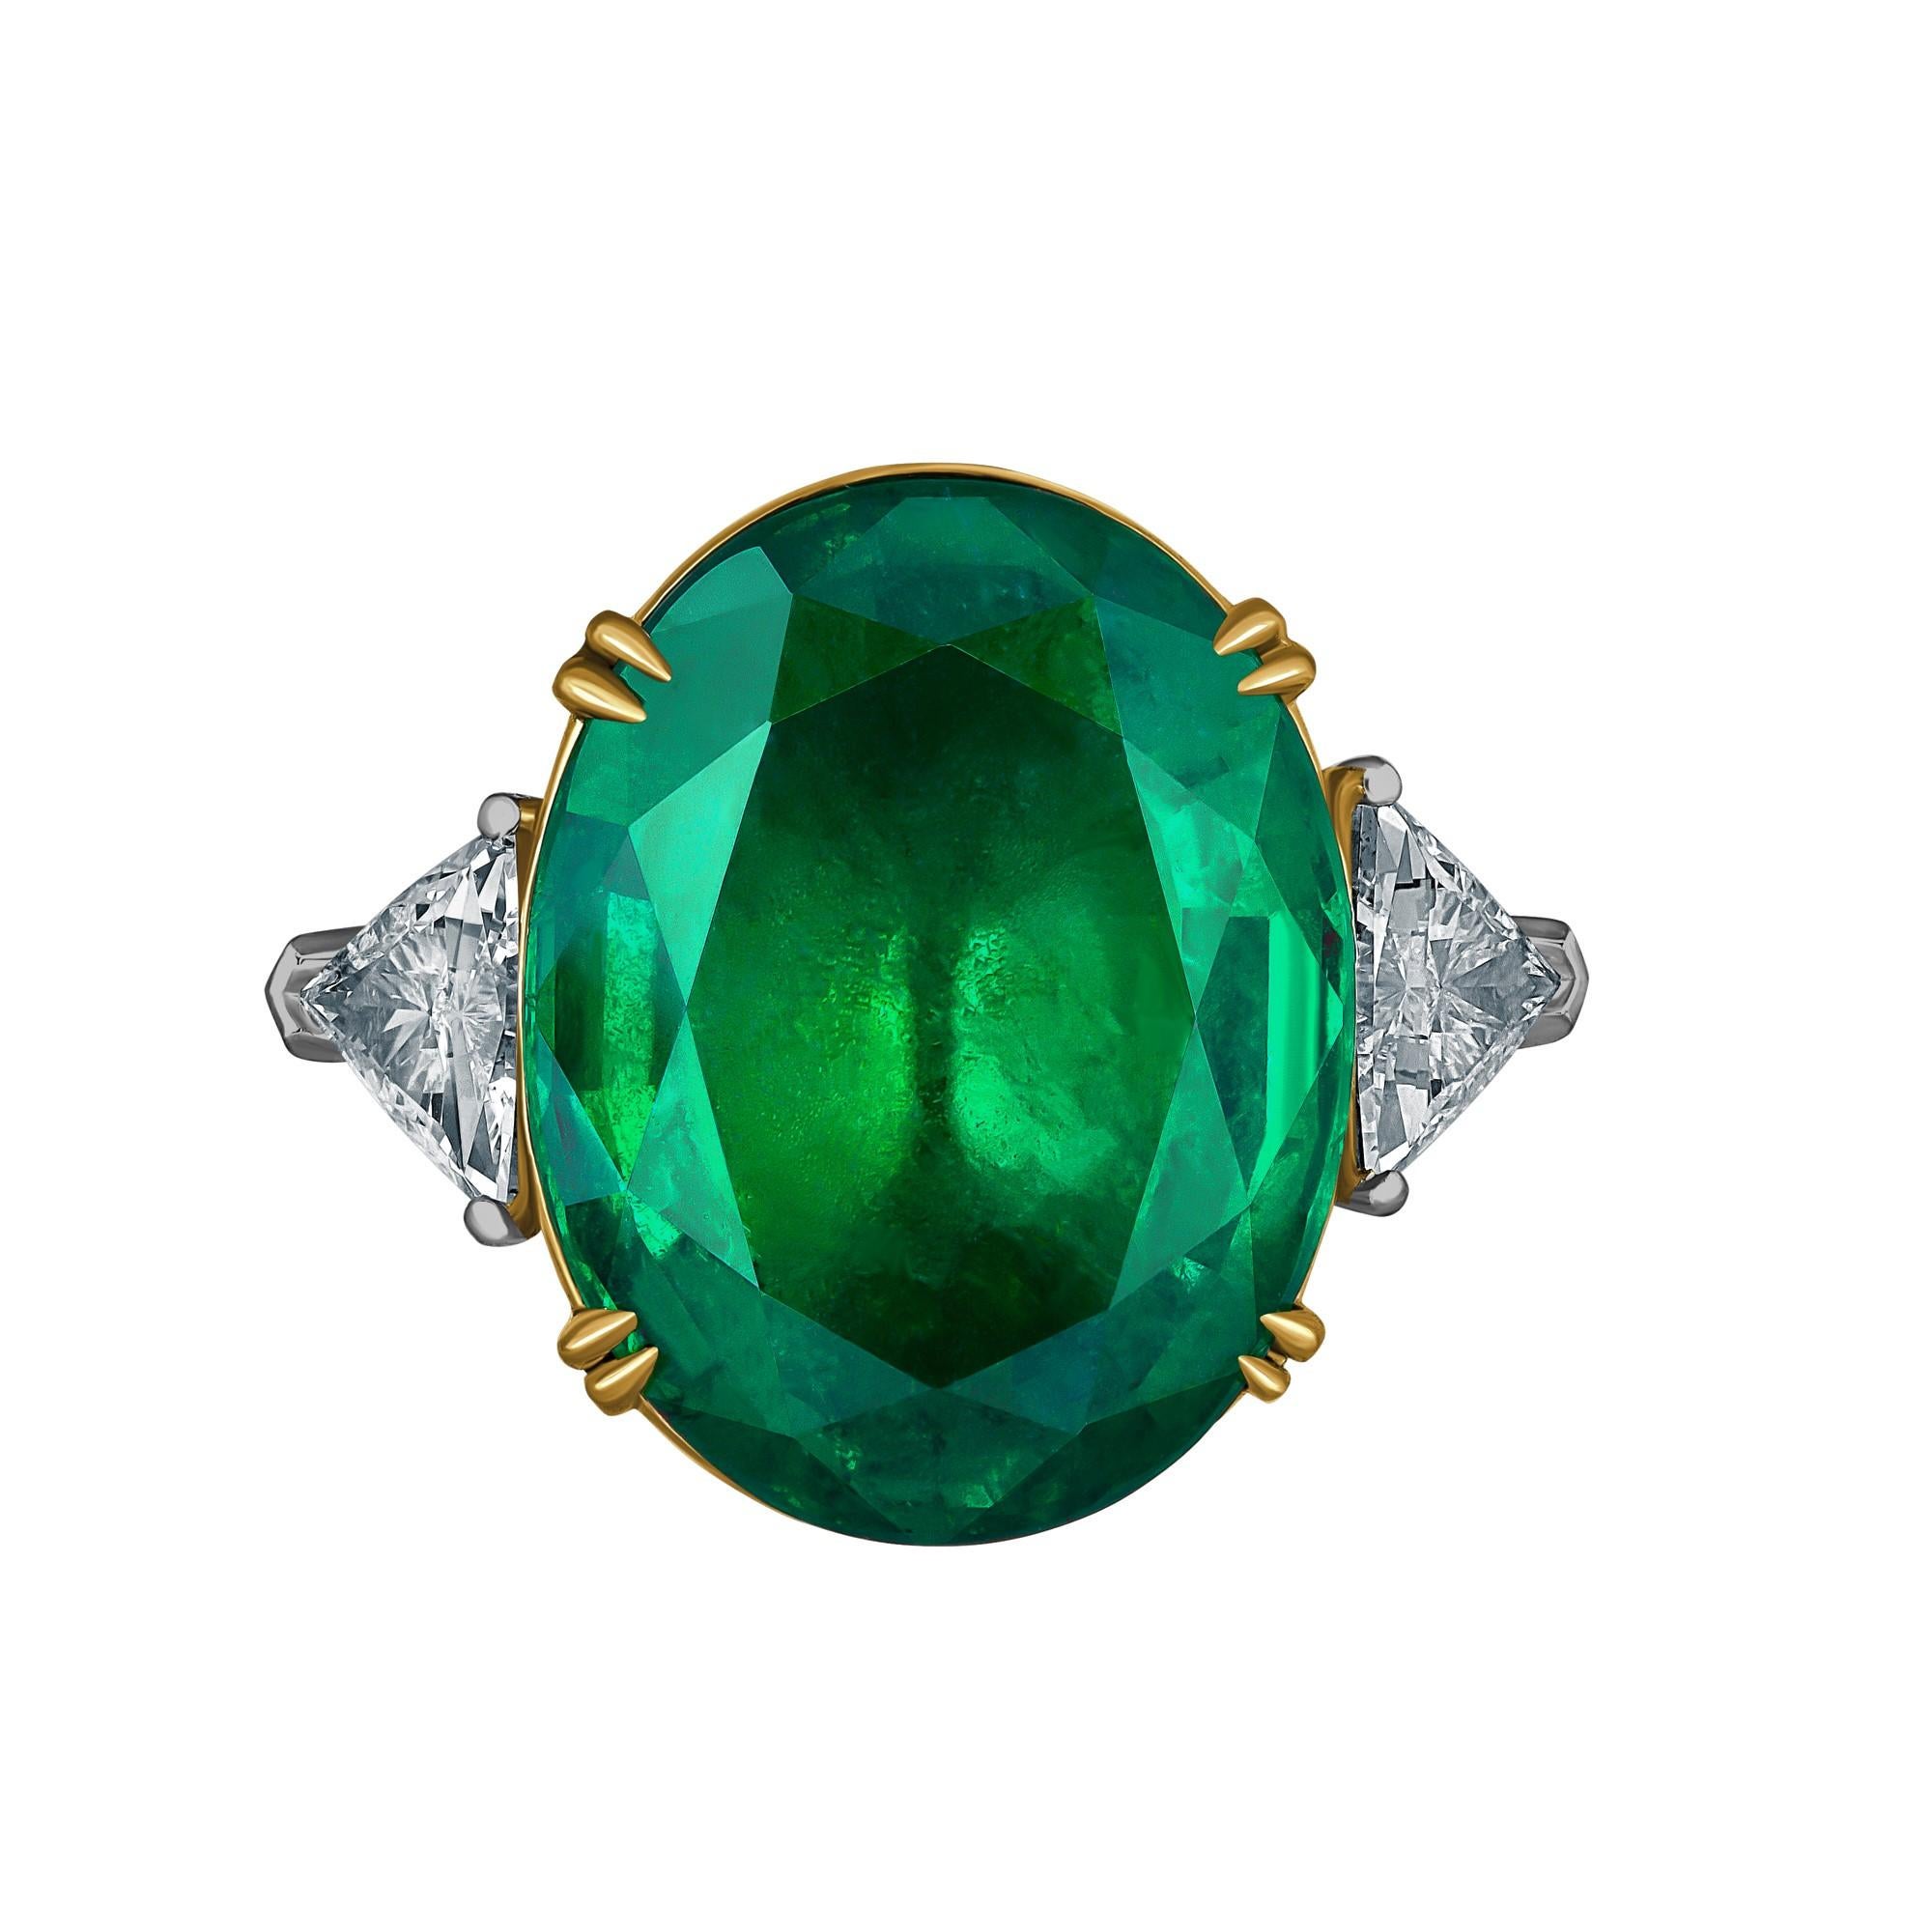 Emilio Jewelry 17.37 Carat Vivid Green Oval Emerald Diamond Ring 
This amazing ring is unique and well thought out before Emilio designed it! Most women today want a ring that is striking, yet humble enough to wear to perform everyday errands. This